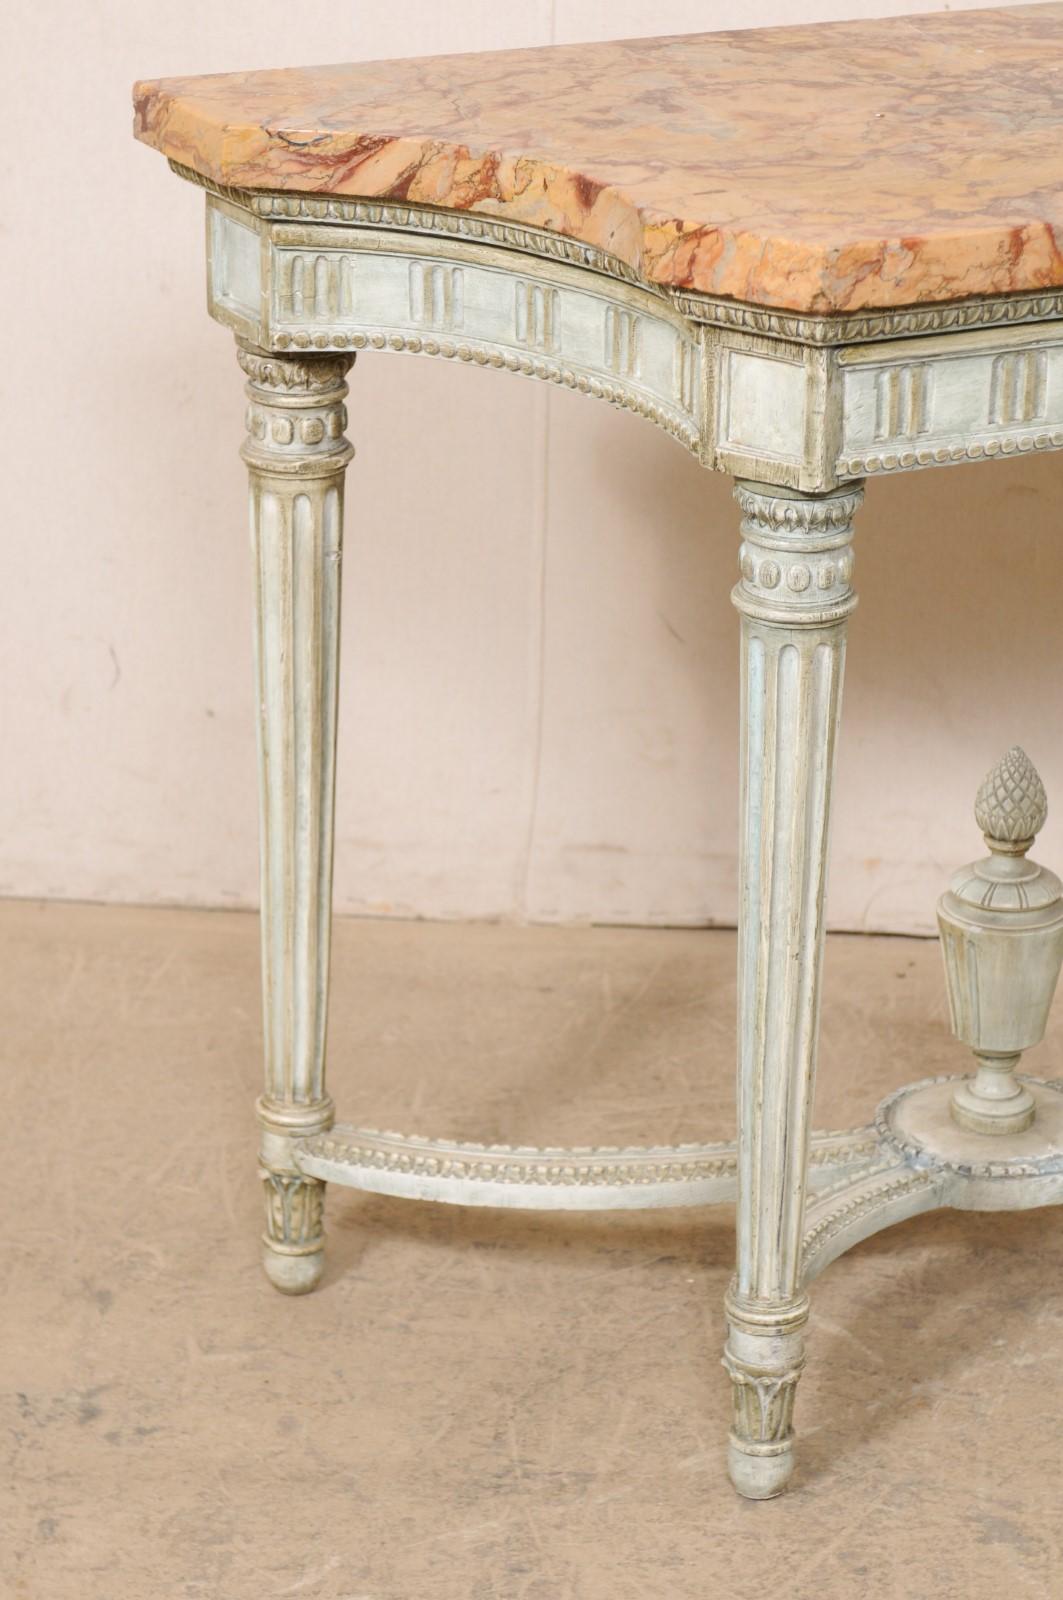 Neoclassical French Neoclassic Period Marble Top Console w/Carved Urn Finial at Underside For Sale